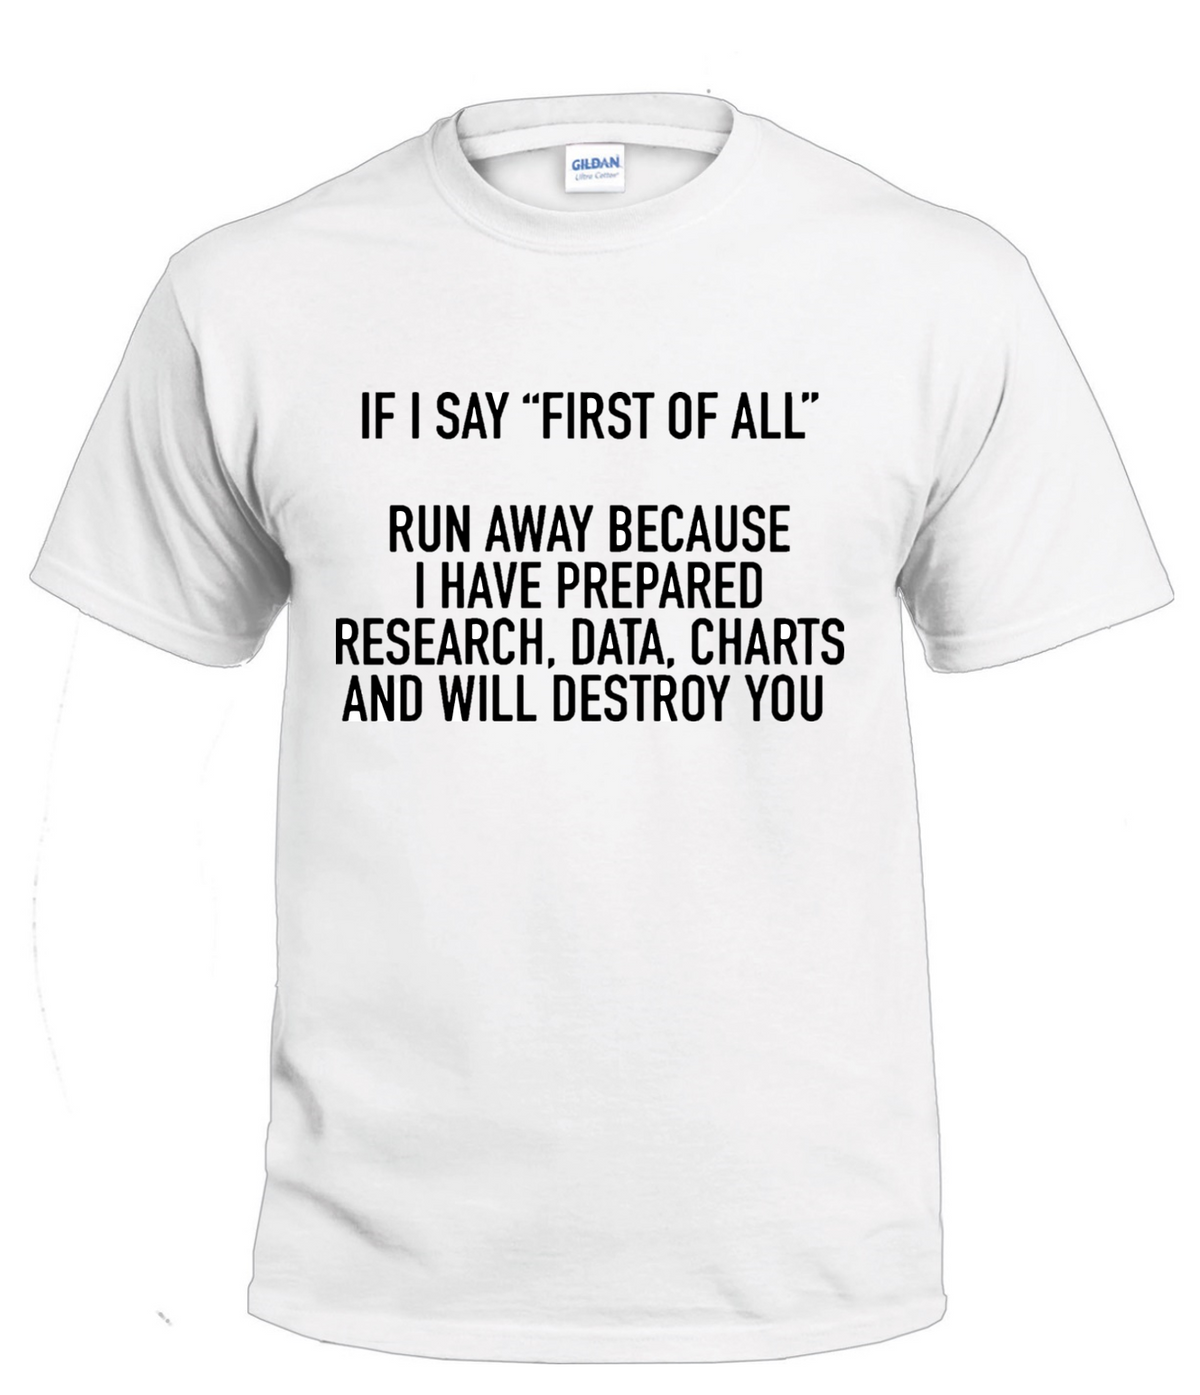 If I Say "First of All" Sassy t-shirt